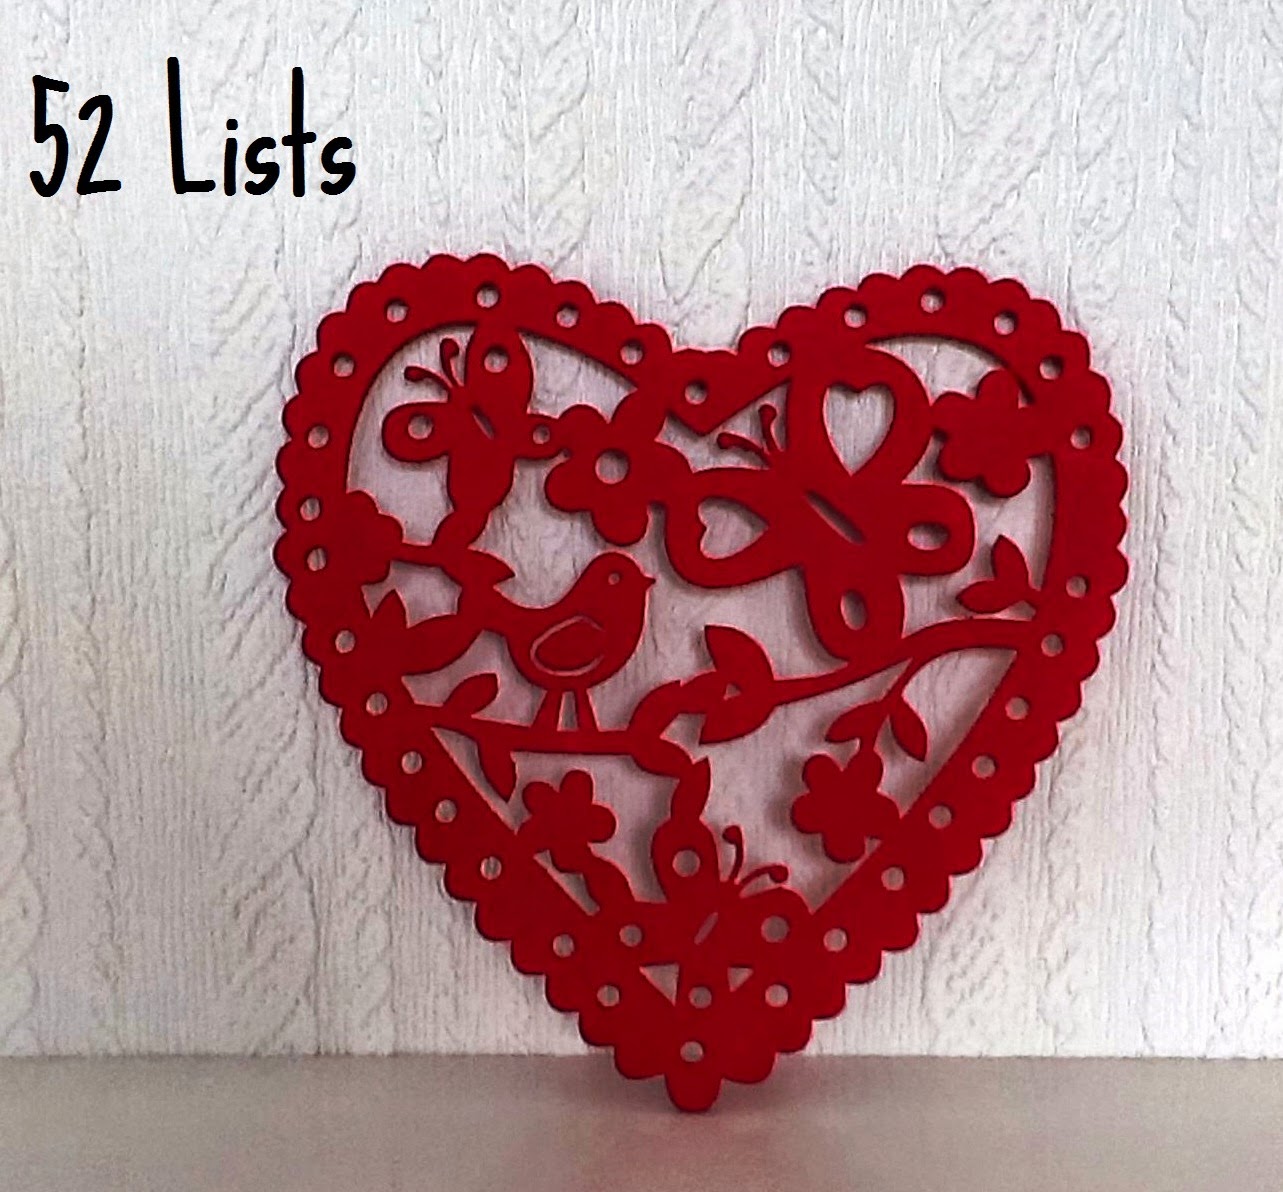 52 Lists - Things That Warm Your Heart